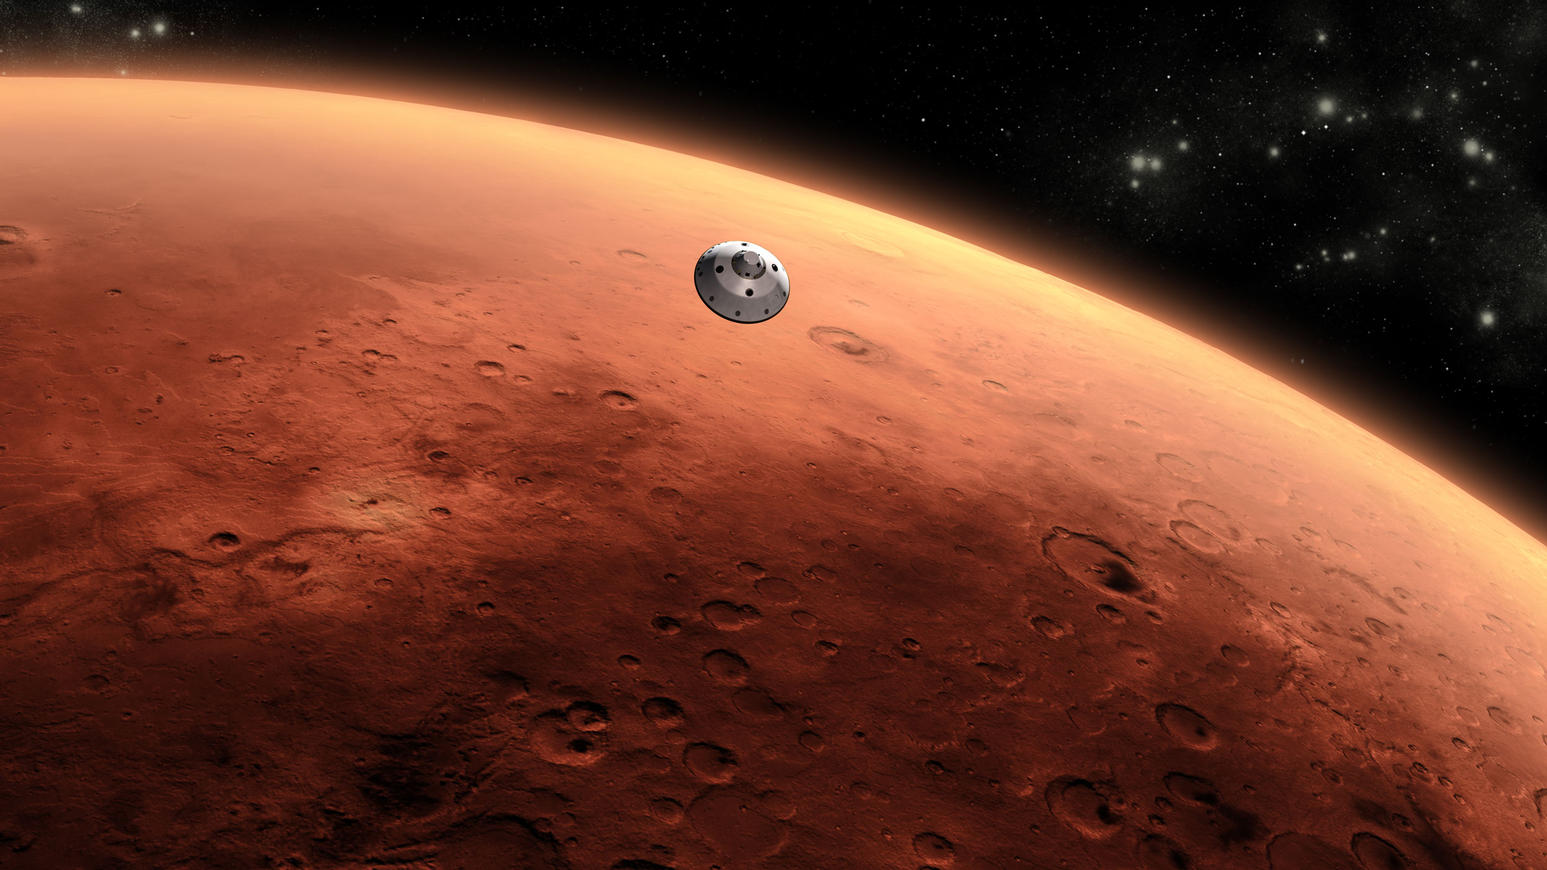 This is an artist's concept of NASA's Mars Science Laboratory spacecraft approaching Mars.